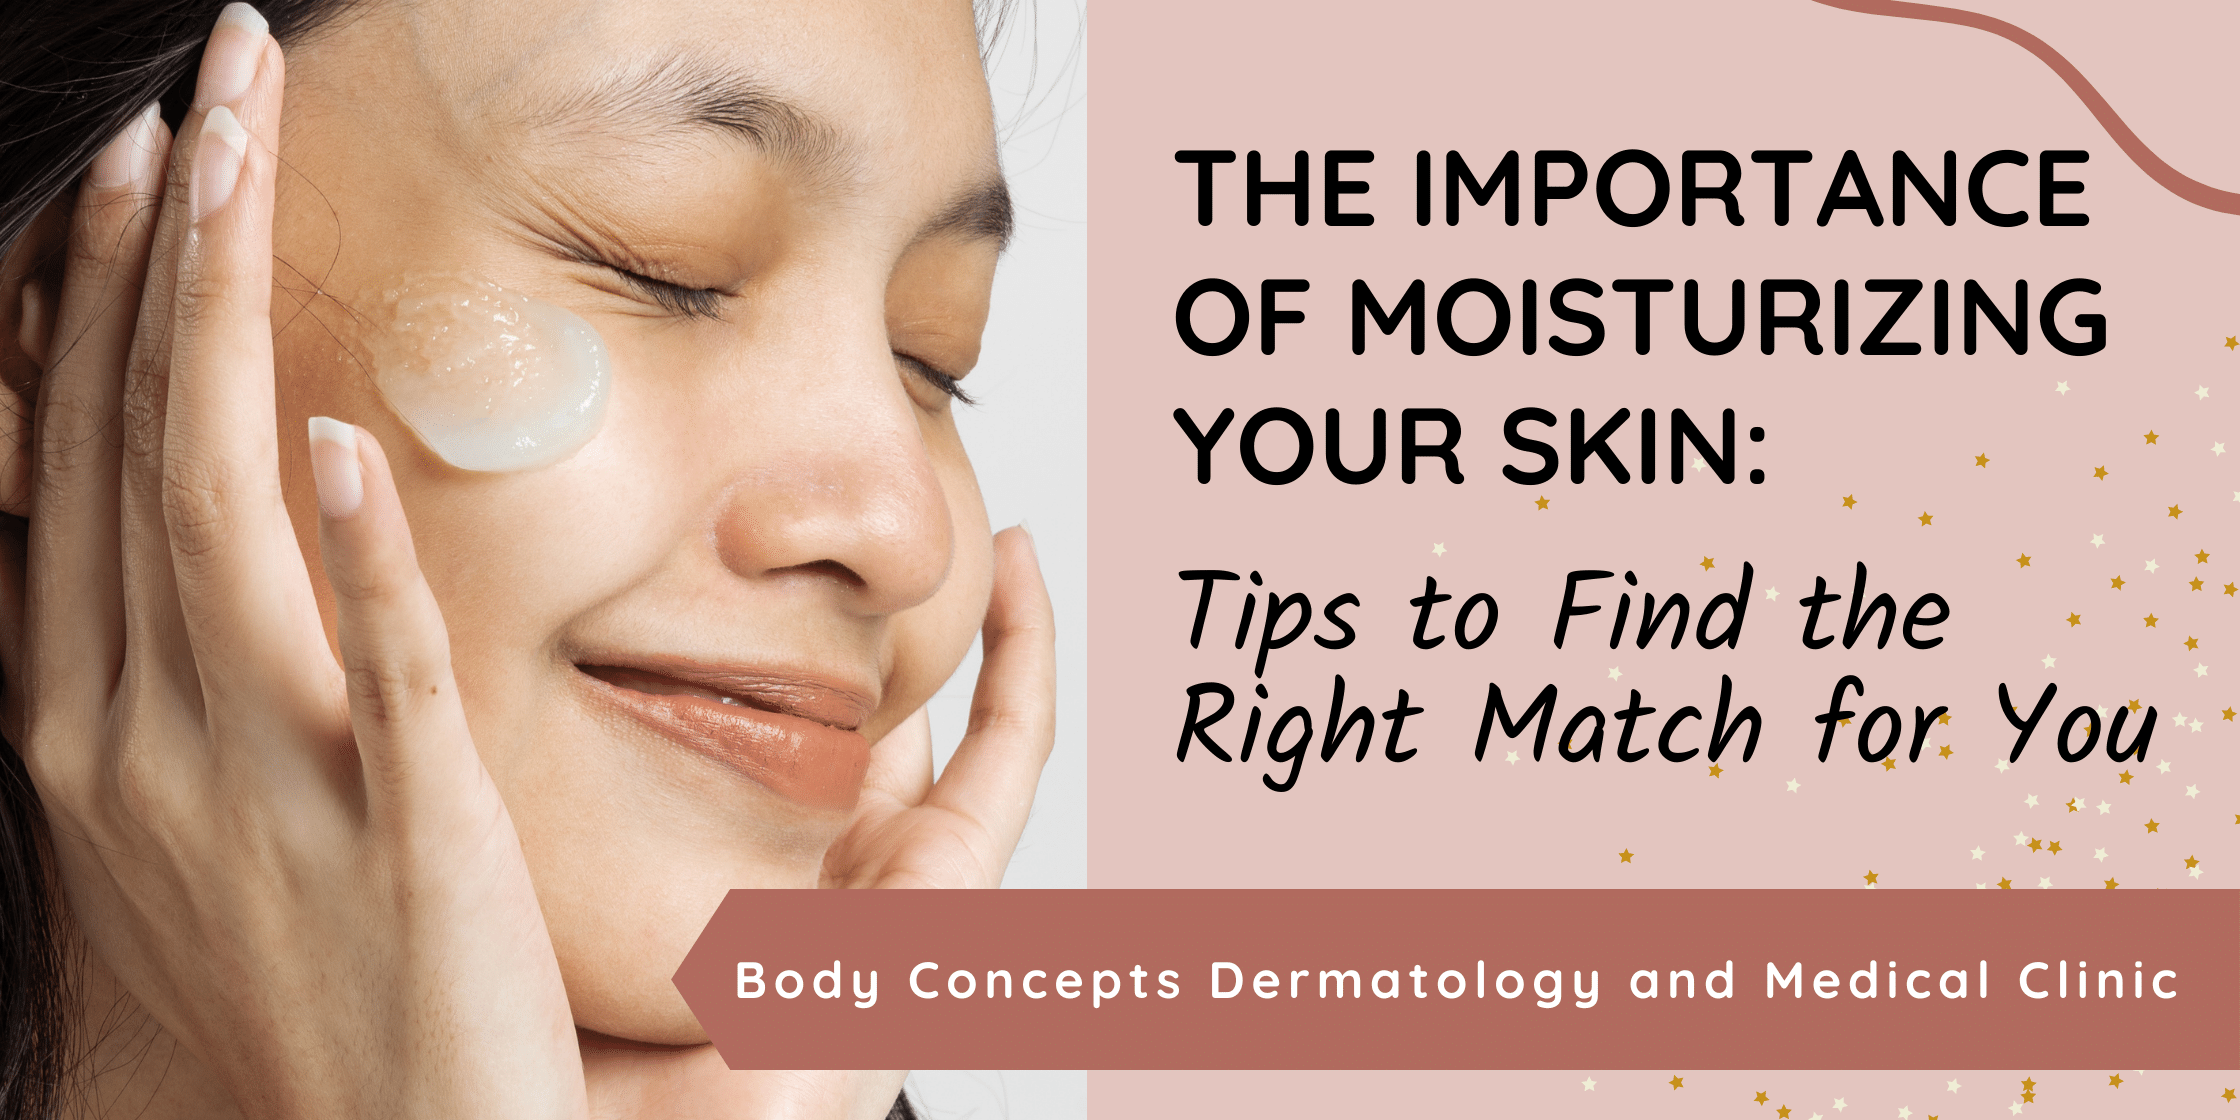 The Importance of Moisturizing Your Skin - Tips to Find the Right Match for You | Body Concepts Dermatology and Medical Clinic | Dr. Pag-asa Bernardo-Bagolor | San Rafael, Bulacan